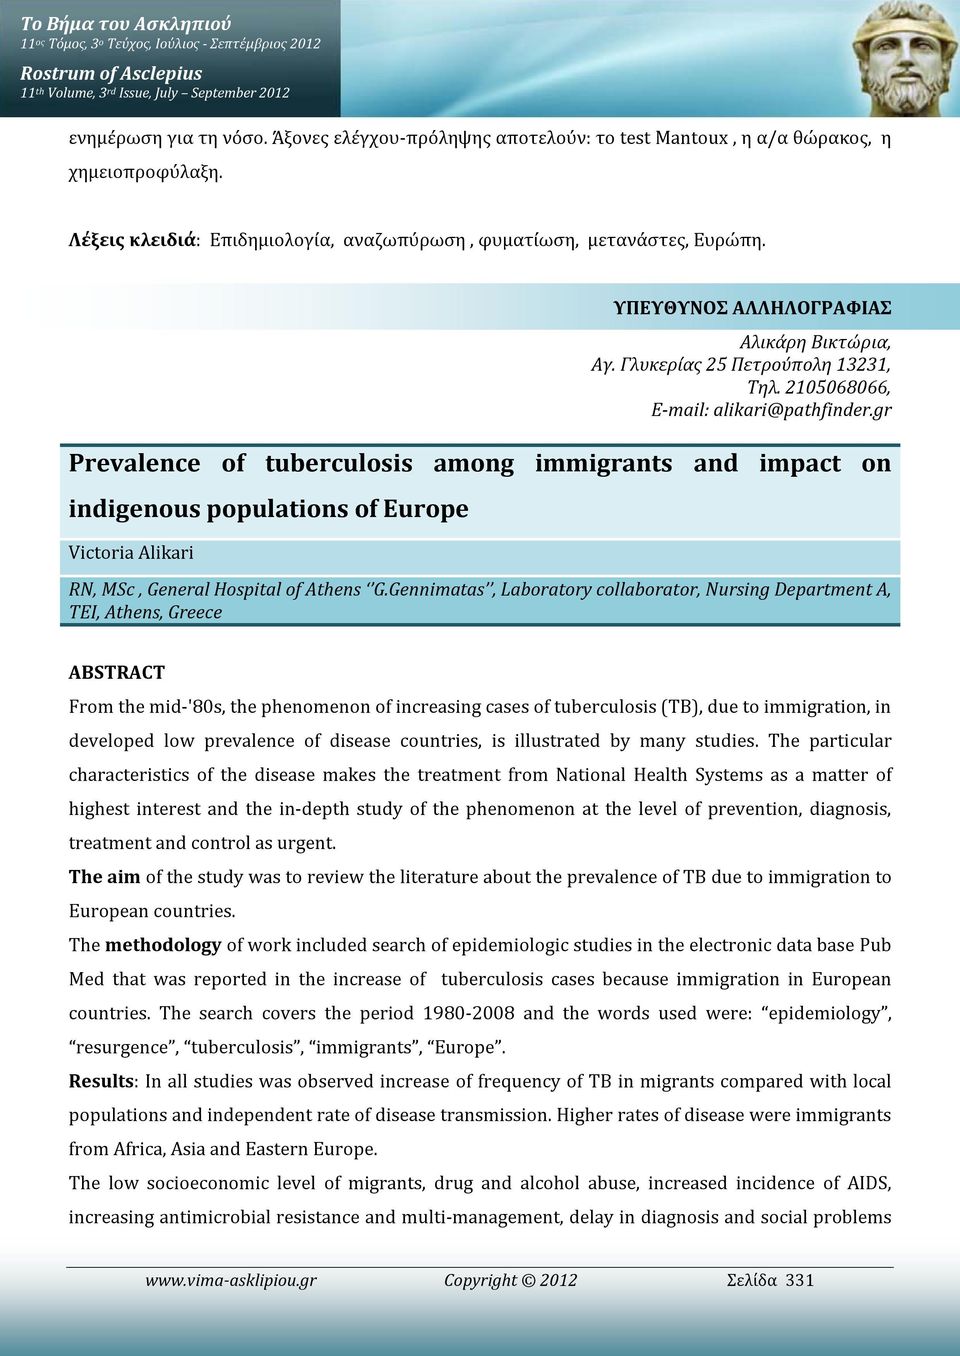 gr Prevalence of tuberculosis among immigrants and impact on indigenous populations of Europe Victoria Alikari RN, MSc, General Hospital of Athens G.